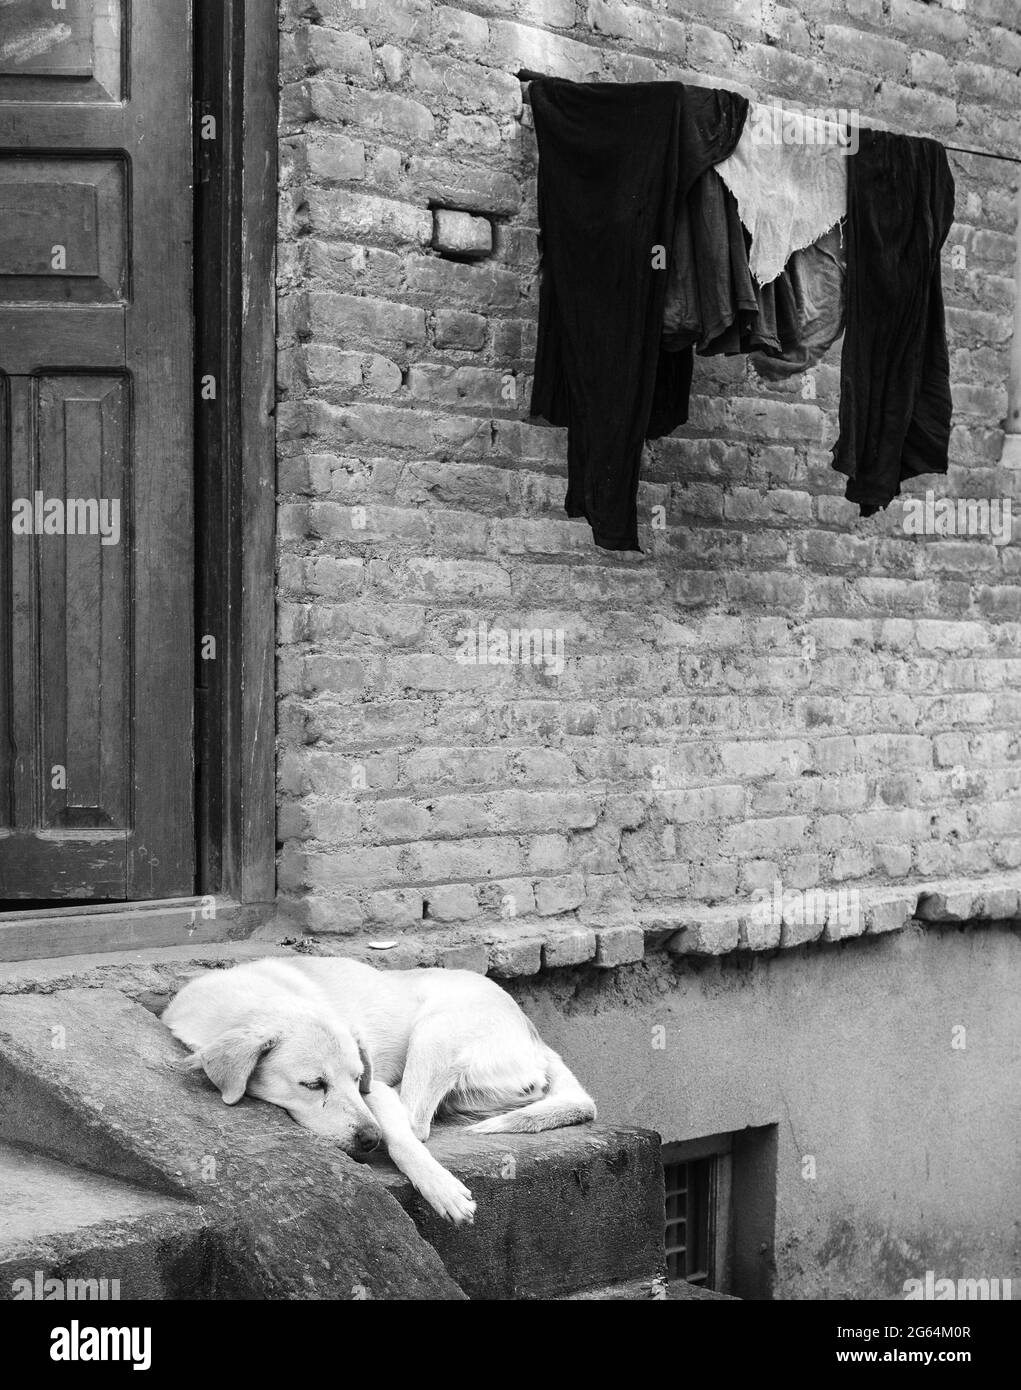 Yellow labrador retriever resting on a porch of a brick building with clothing hanging on a line on the building, in black and white. Stock Photo